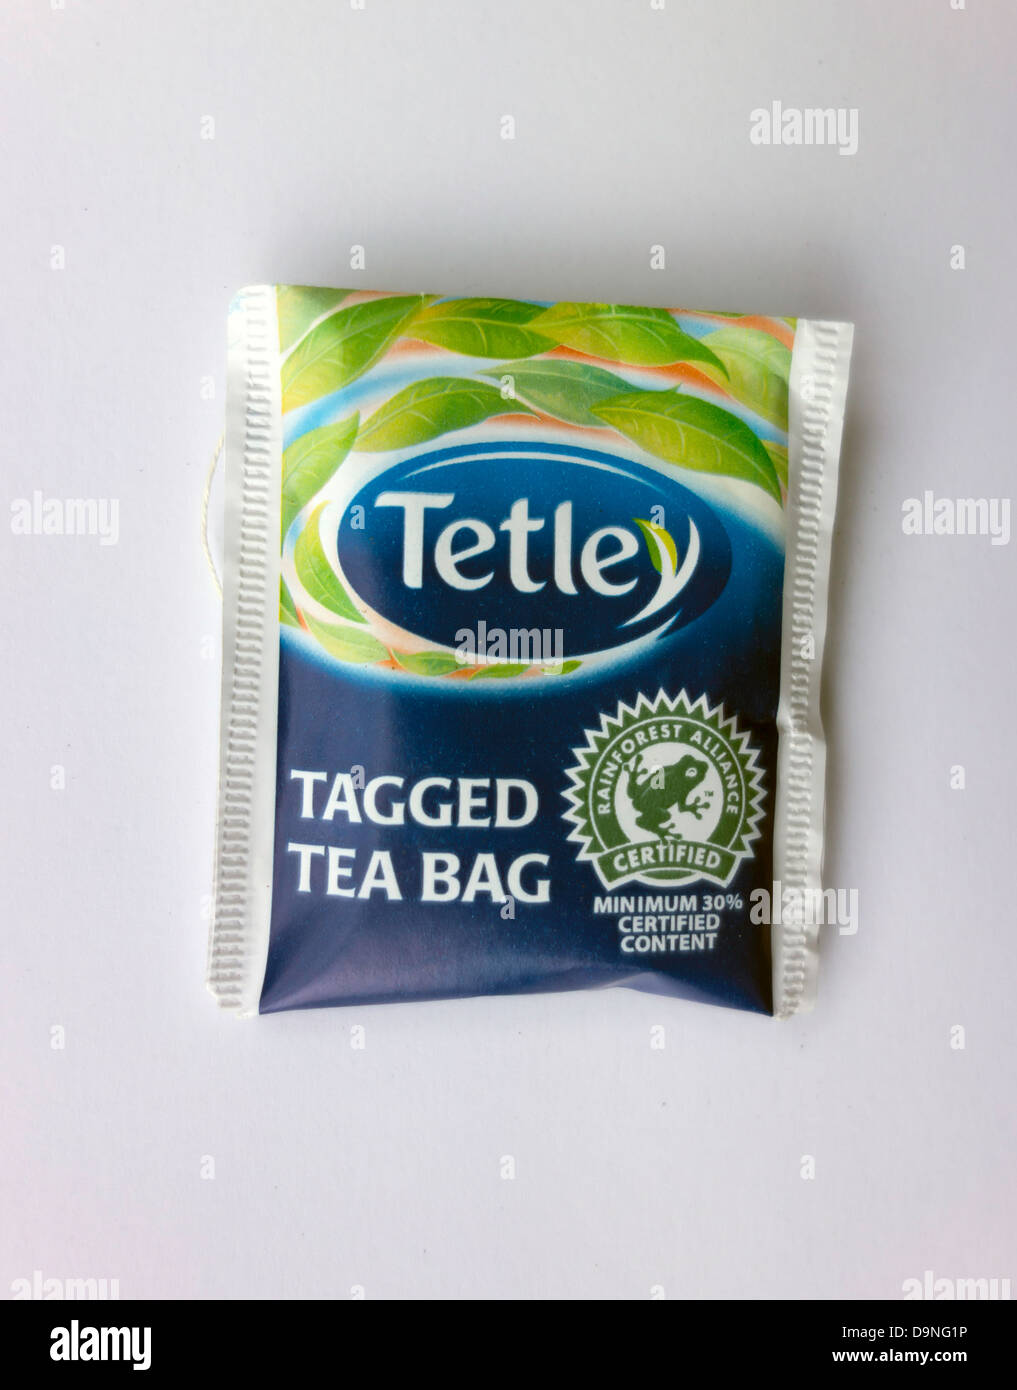 Tetley tagged tea bag outer packaging Stock Photo